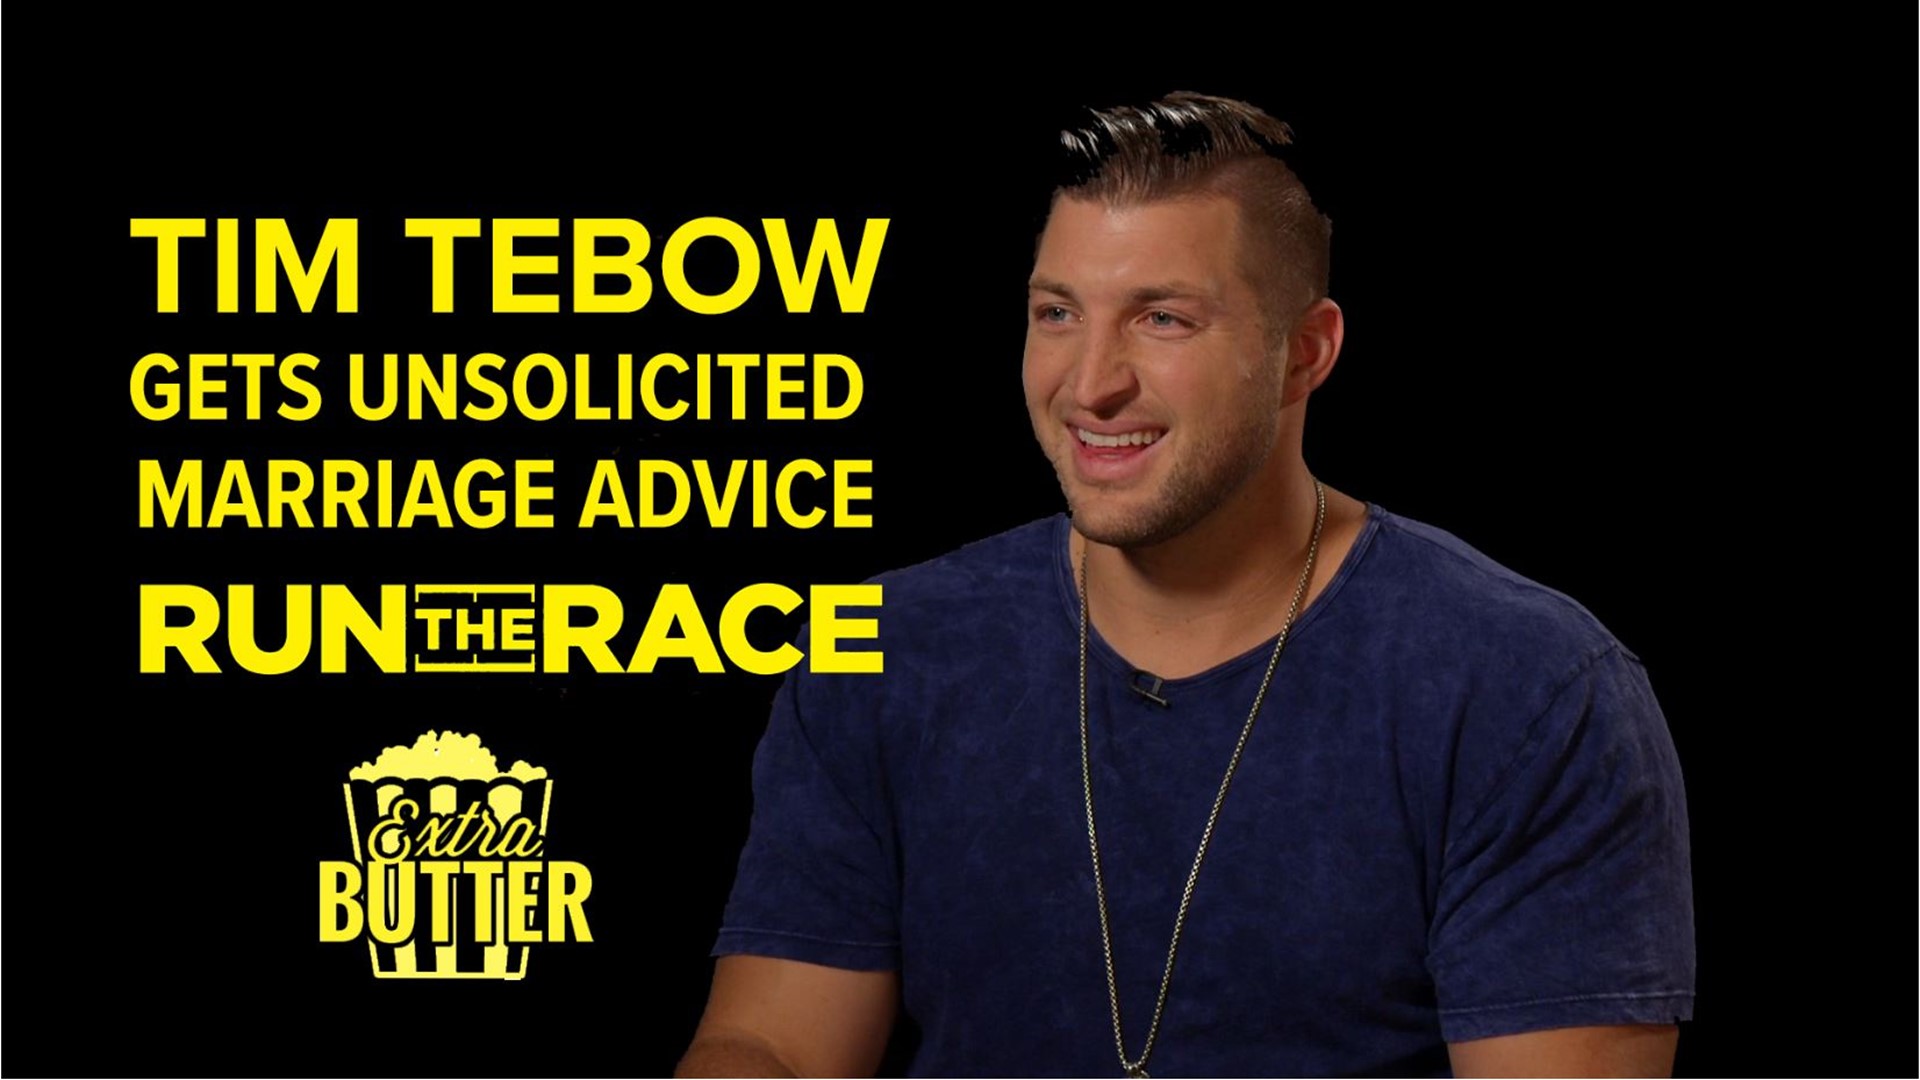 Tim Tebow talks about his new football movie 'Run the Race.' Time tells Mark S. Allen about the importance of faith and the story he wants to tell. Mark also takes the opportunity to share some bedtime advice with the engaged athlete. Interview arranged by Roadside Attractions.